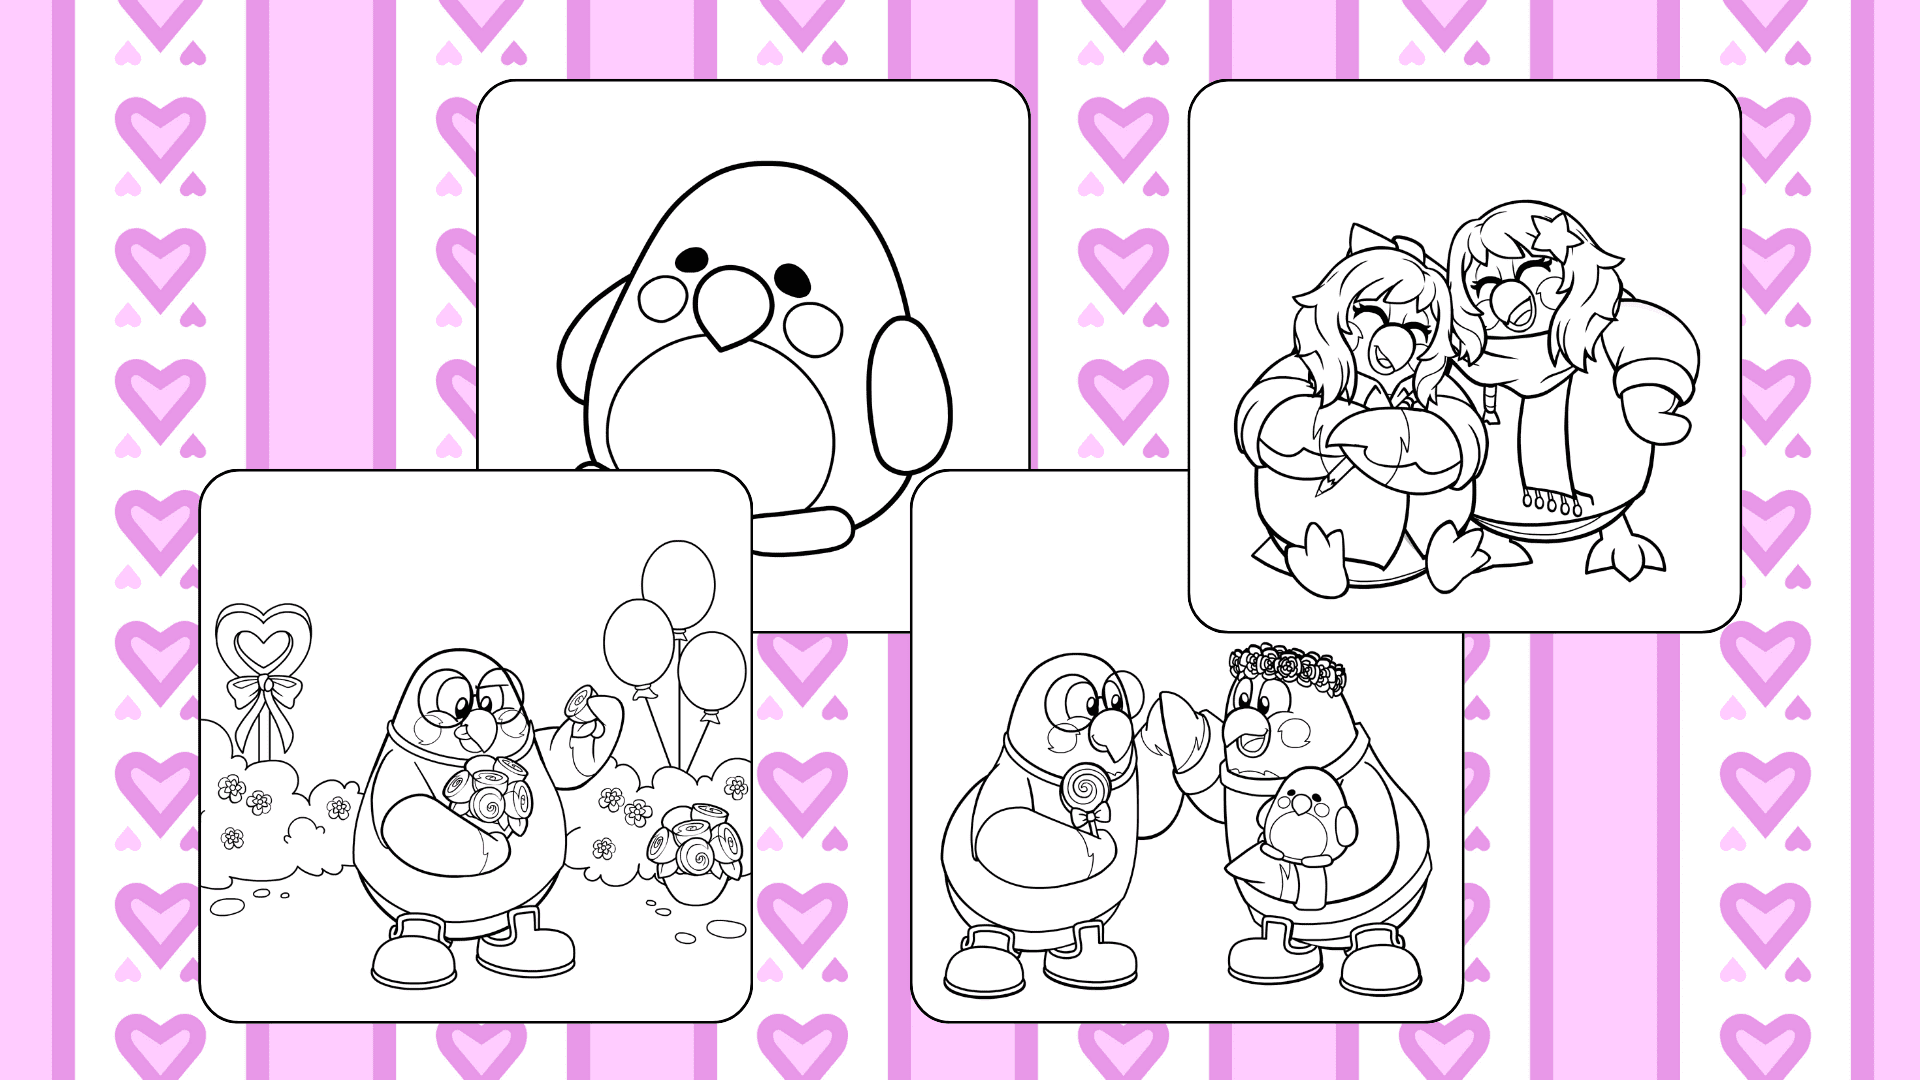 Four black-and-white Valentine coloring pages for kids printables like friends hugging and high fiving. A pink heart background.